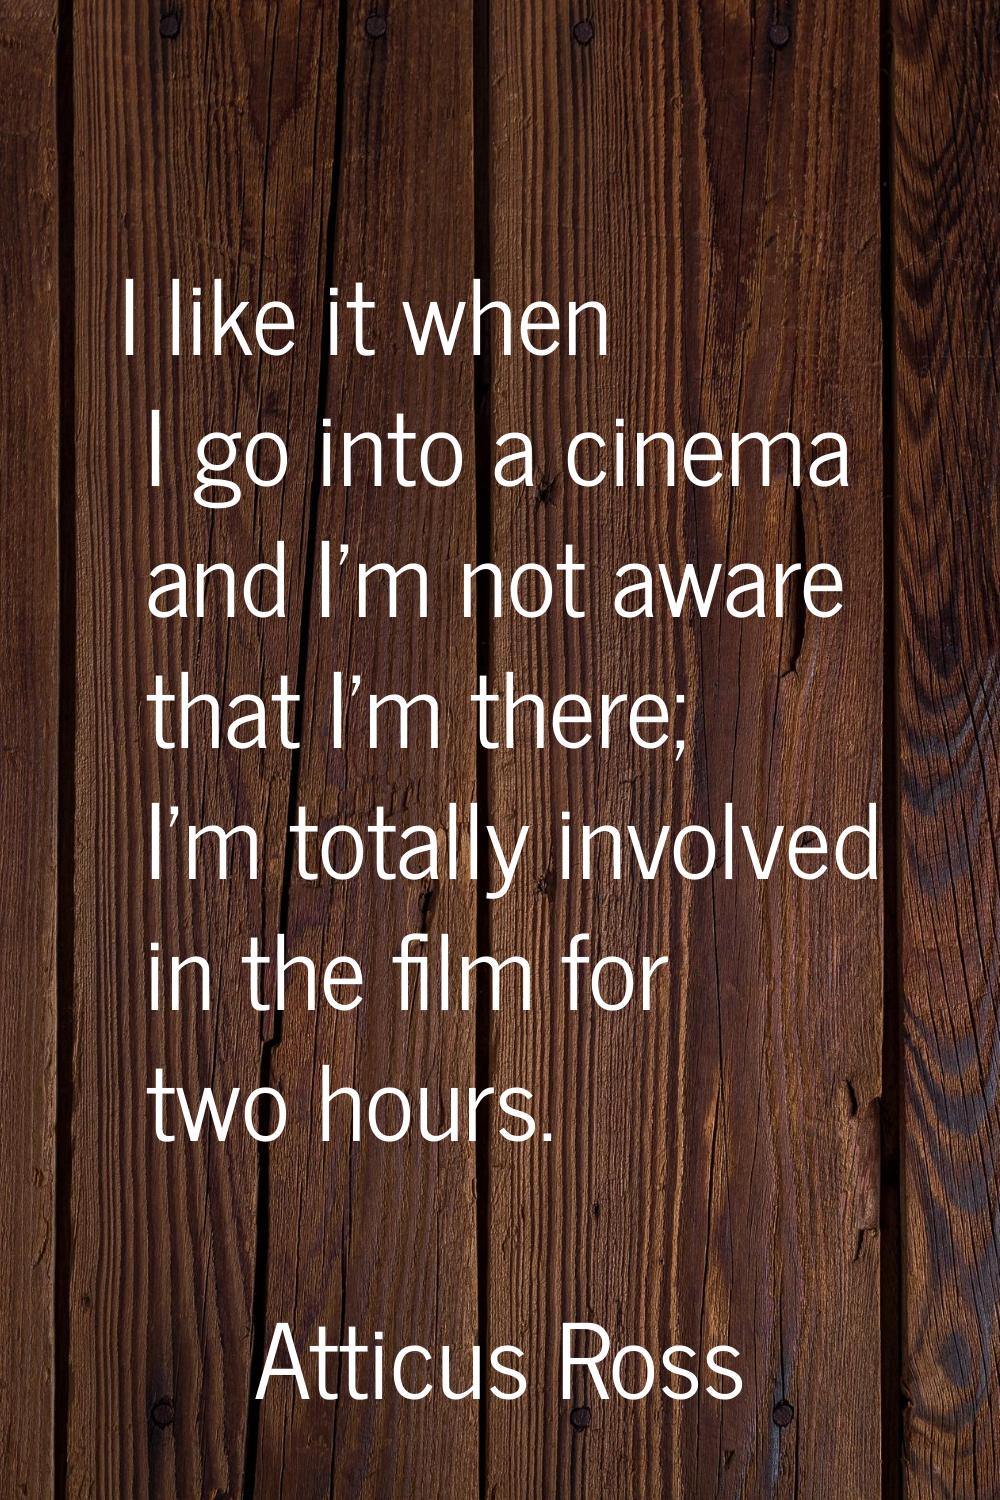 I like it when I go into a cinema and I'm not aware that I'm there; I'm totally involved in the fil